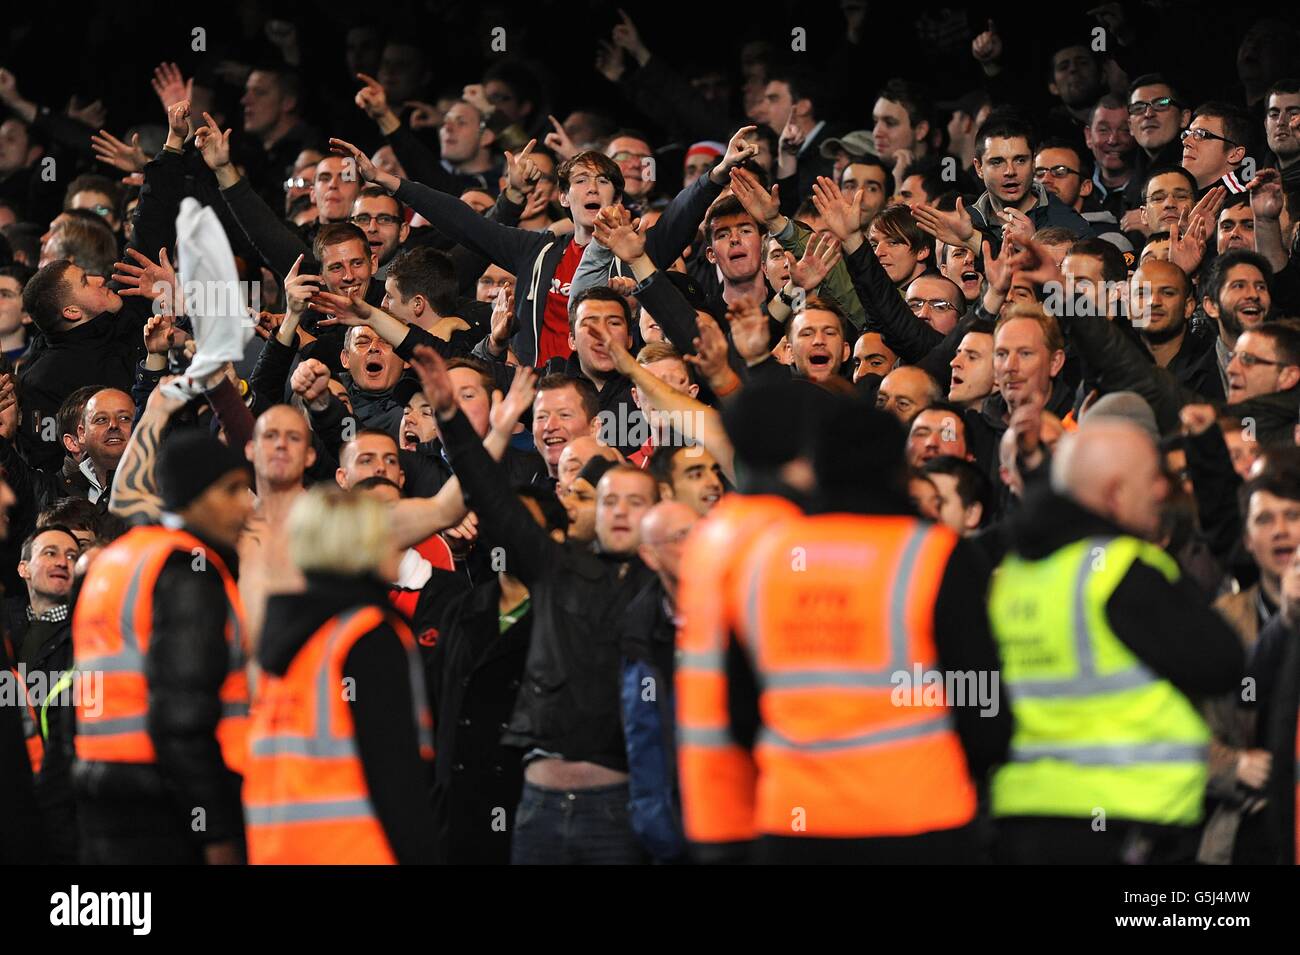 Manchester United fans cheer on their side in the stands Stock Photo